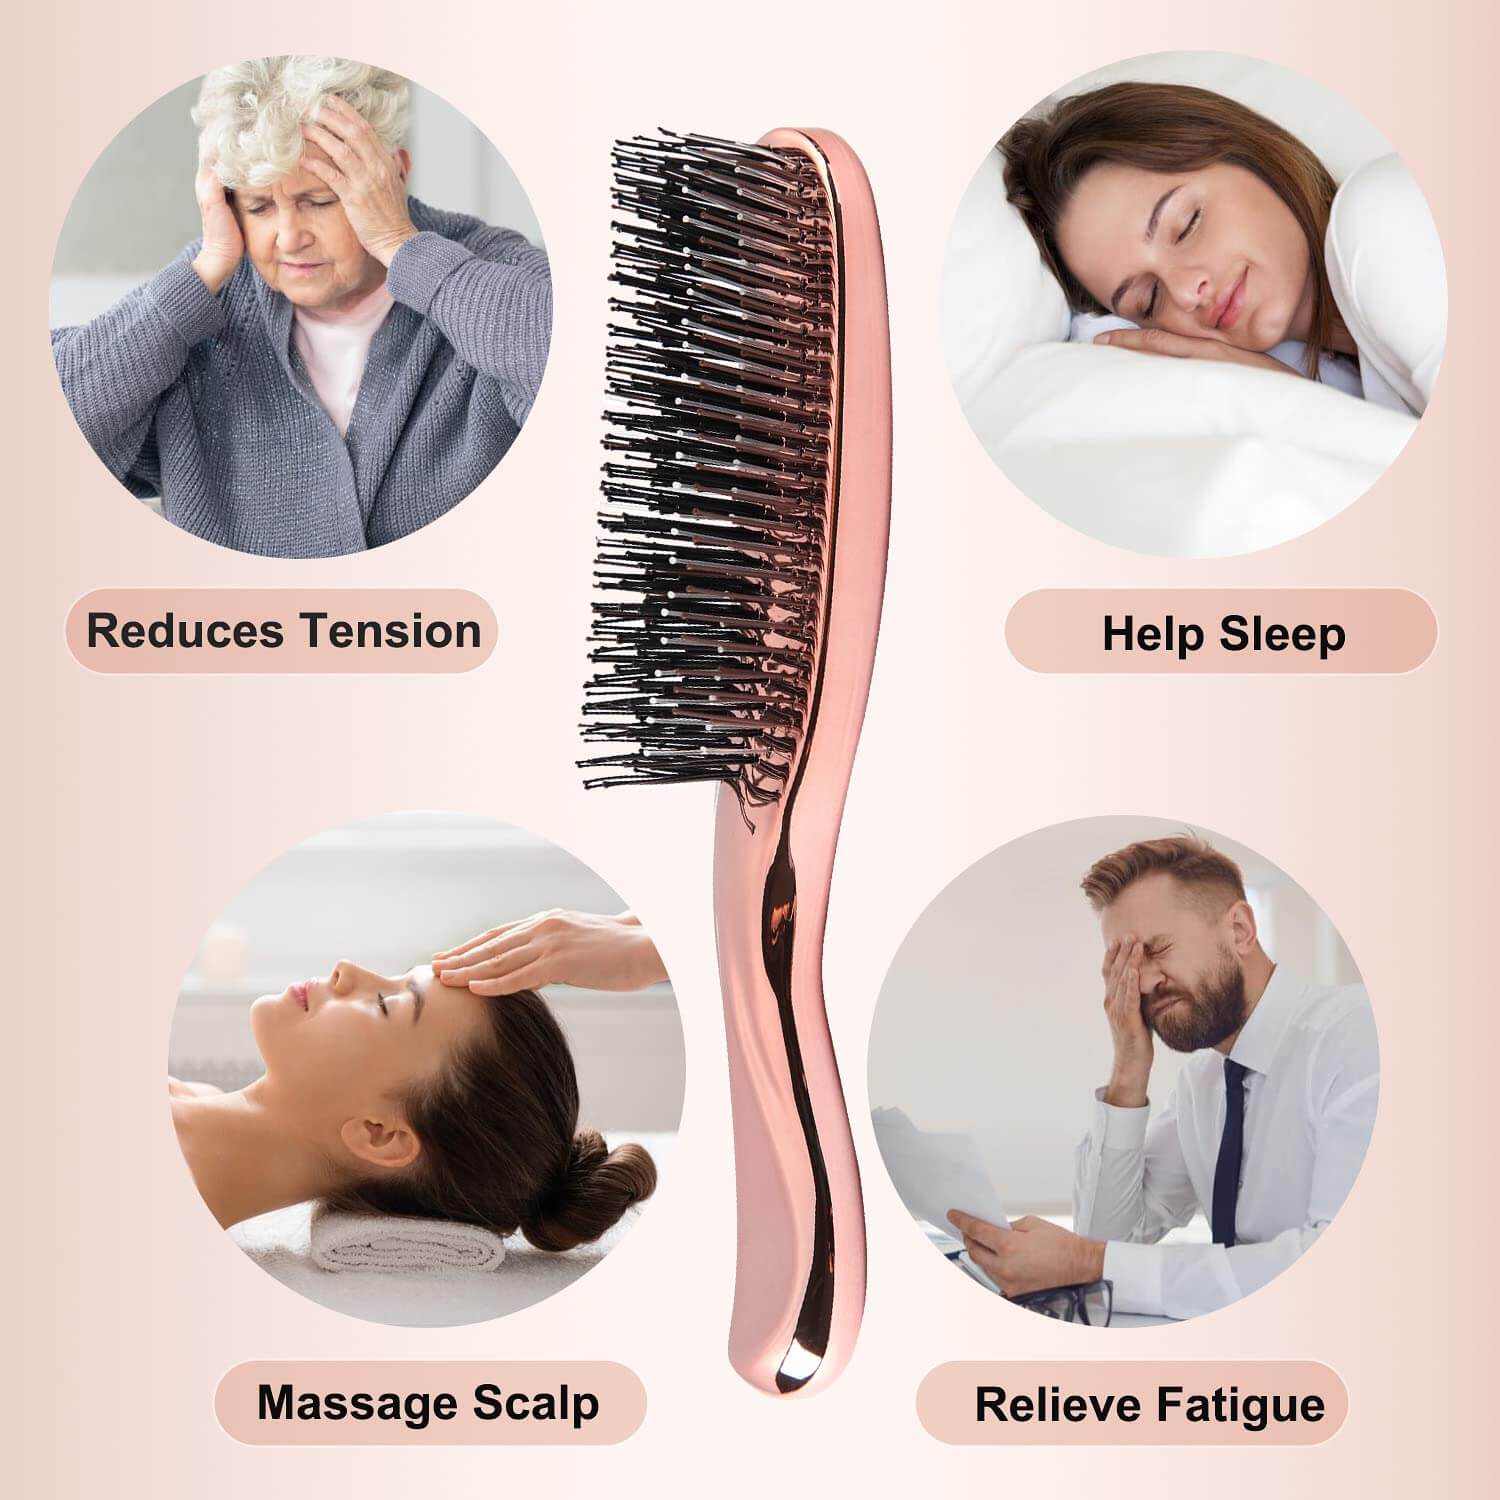 The benefits of using the Scalp Massage Brush - Reduces tension, helps sleep, massages the scalp and relieves fatigue.